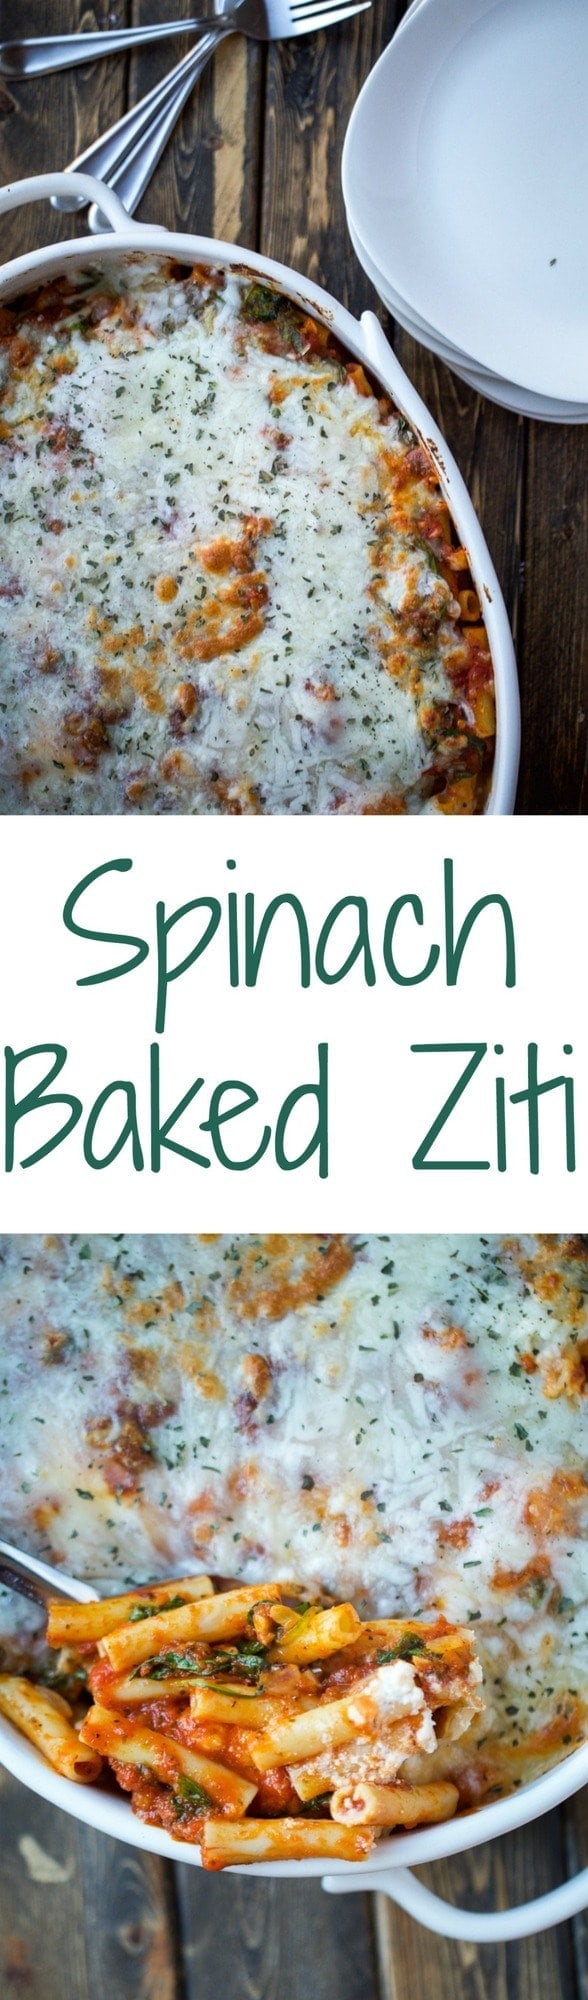 A classic comfort food that is baked with spinach, ziti noodles, pasta sauce, and so many cheeses. It's easy to make and perfect for a crowd.